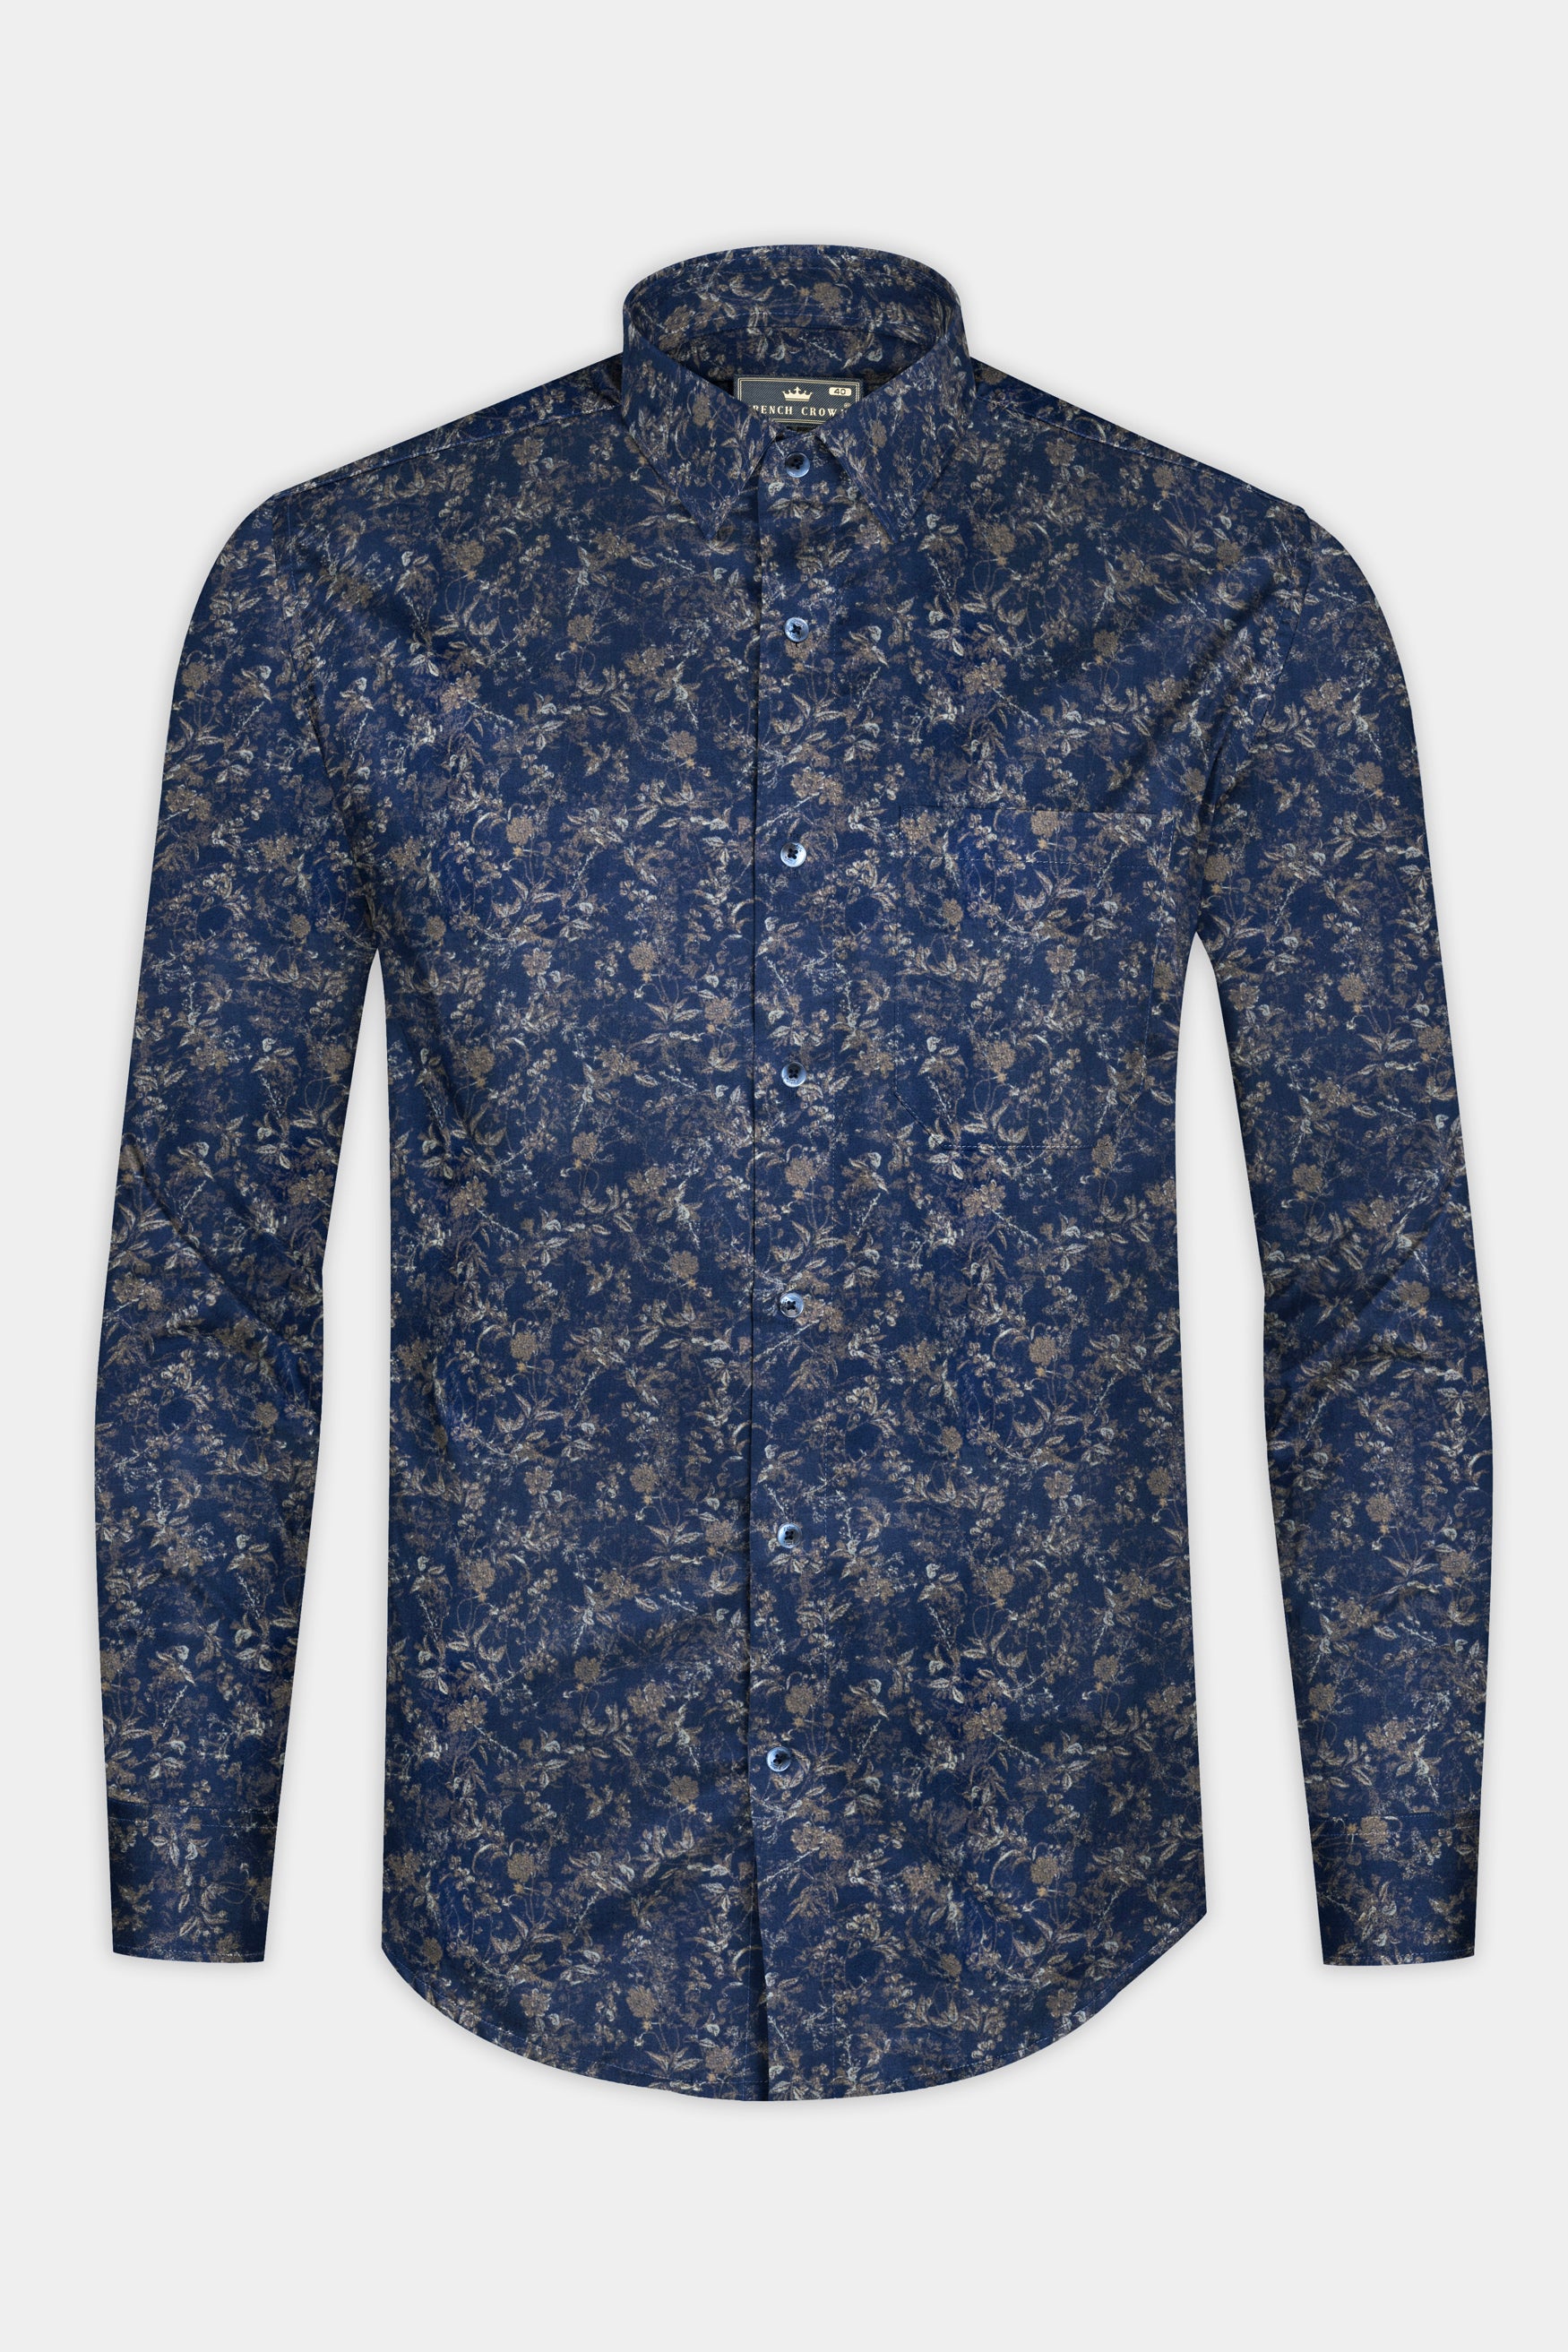 Big Stone Blue with Oyster Gray Leaf Printed Twill Cotton Shirt